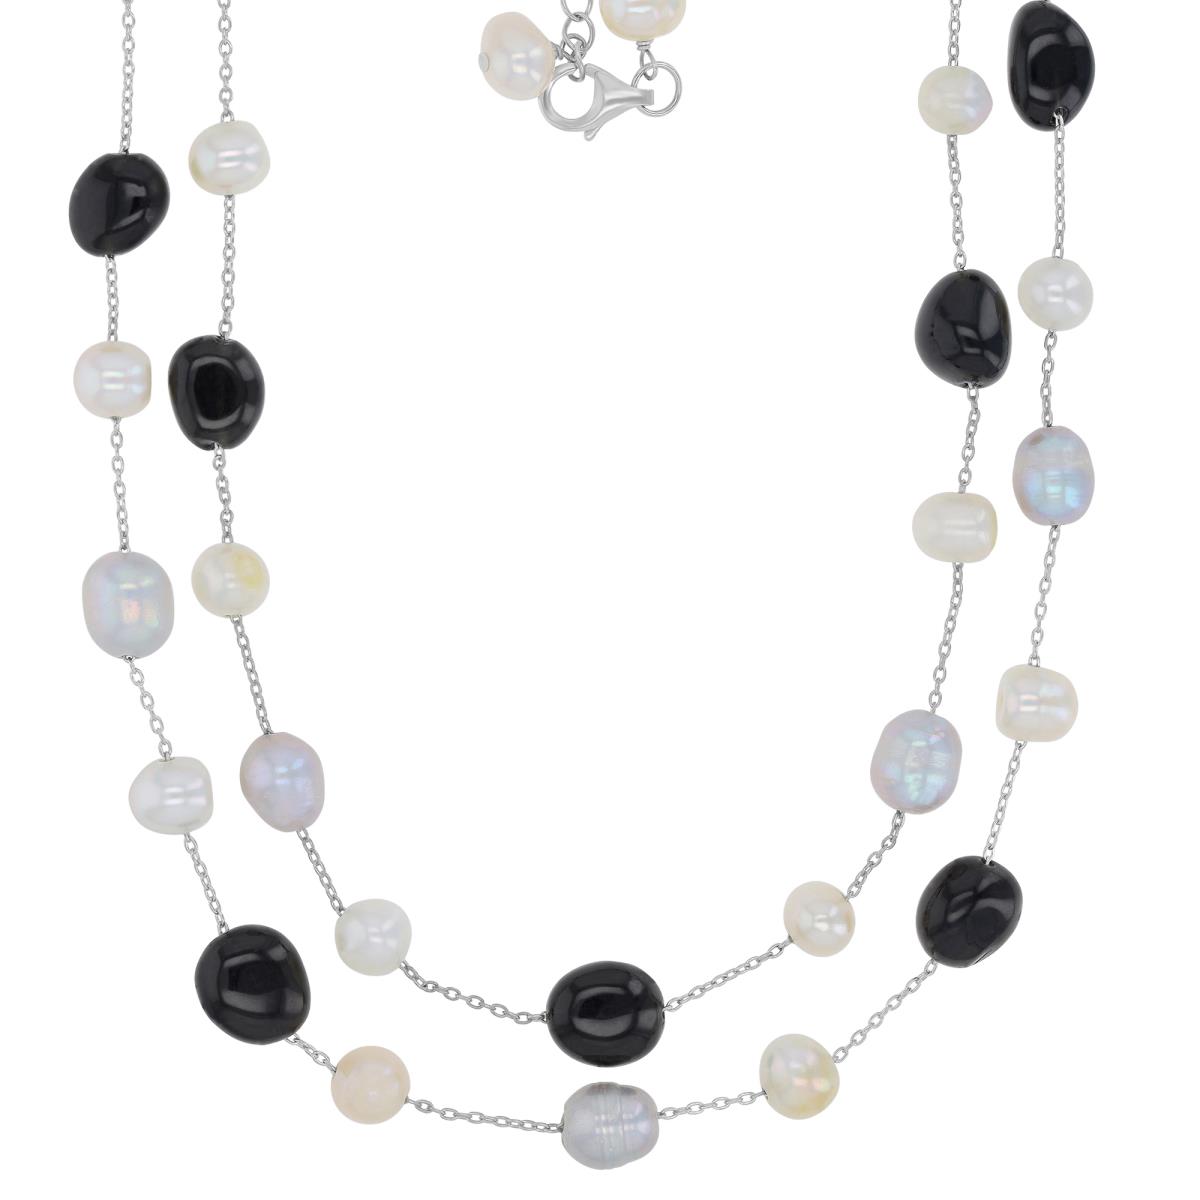 Sterling Silver Rhodium 7-8mm White Potato Freshwater Pearl & 8-10mm Black Onyx 18-19" Double Necklace